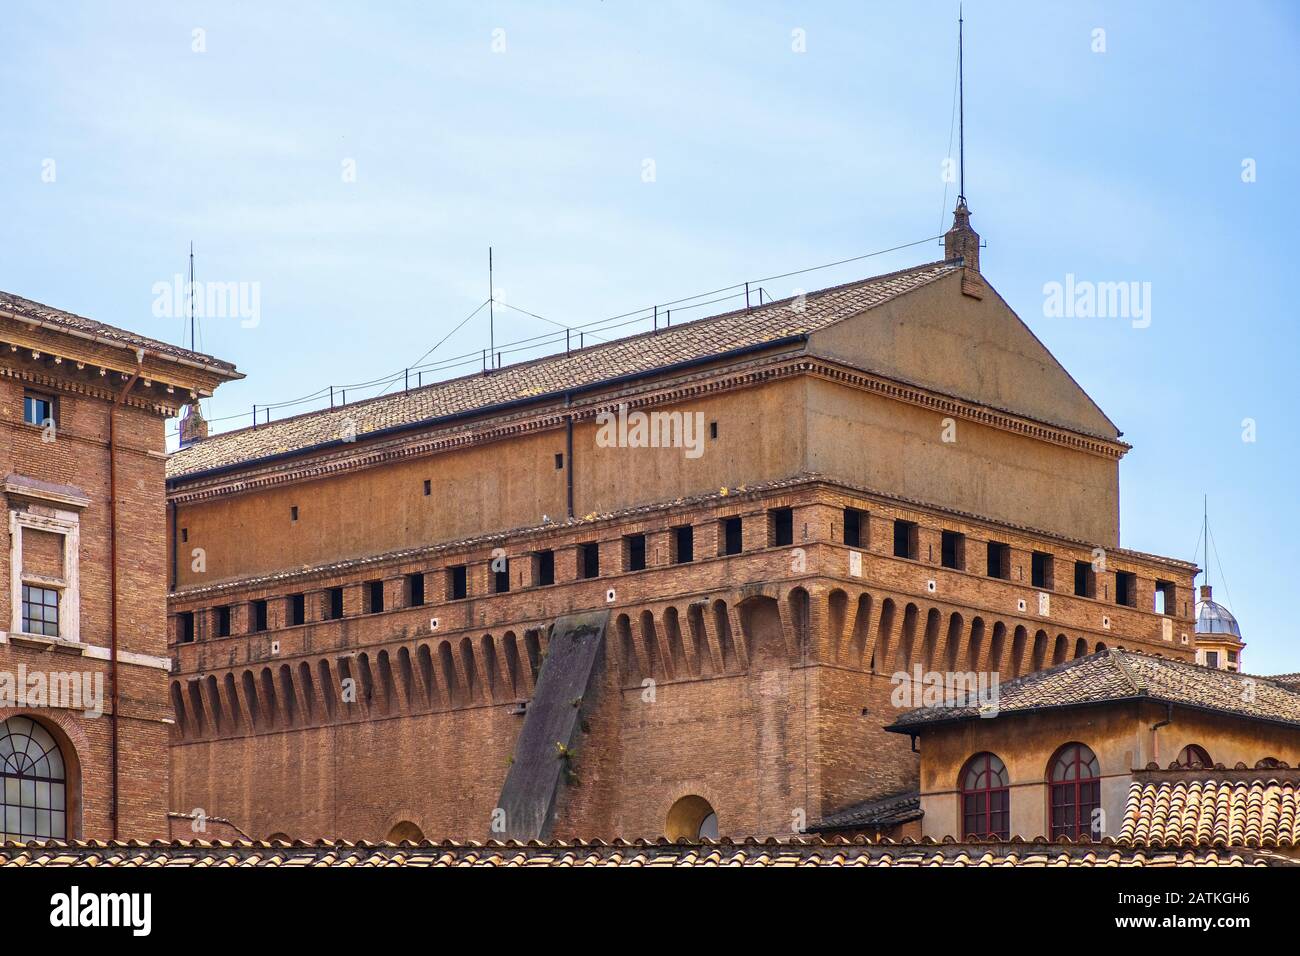 Rome, Vatican City / Italy - 2019/06/15: Exterior of the Sistine Chapel - Cappella Sistina - seen from the Vatican Gardens in the Vatican City State Stock Photo